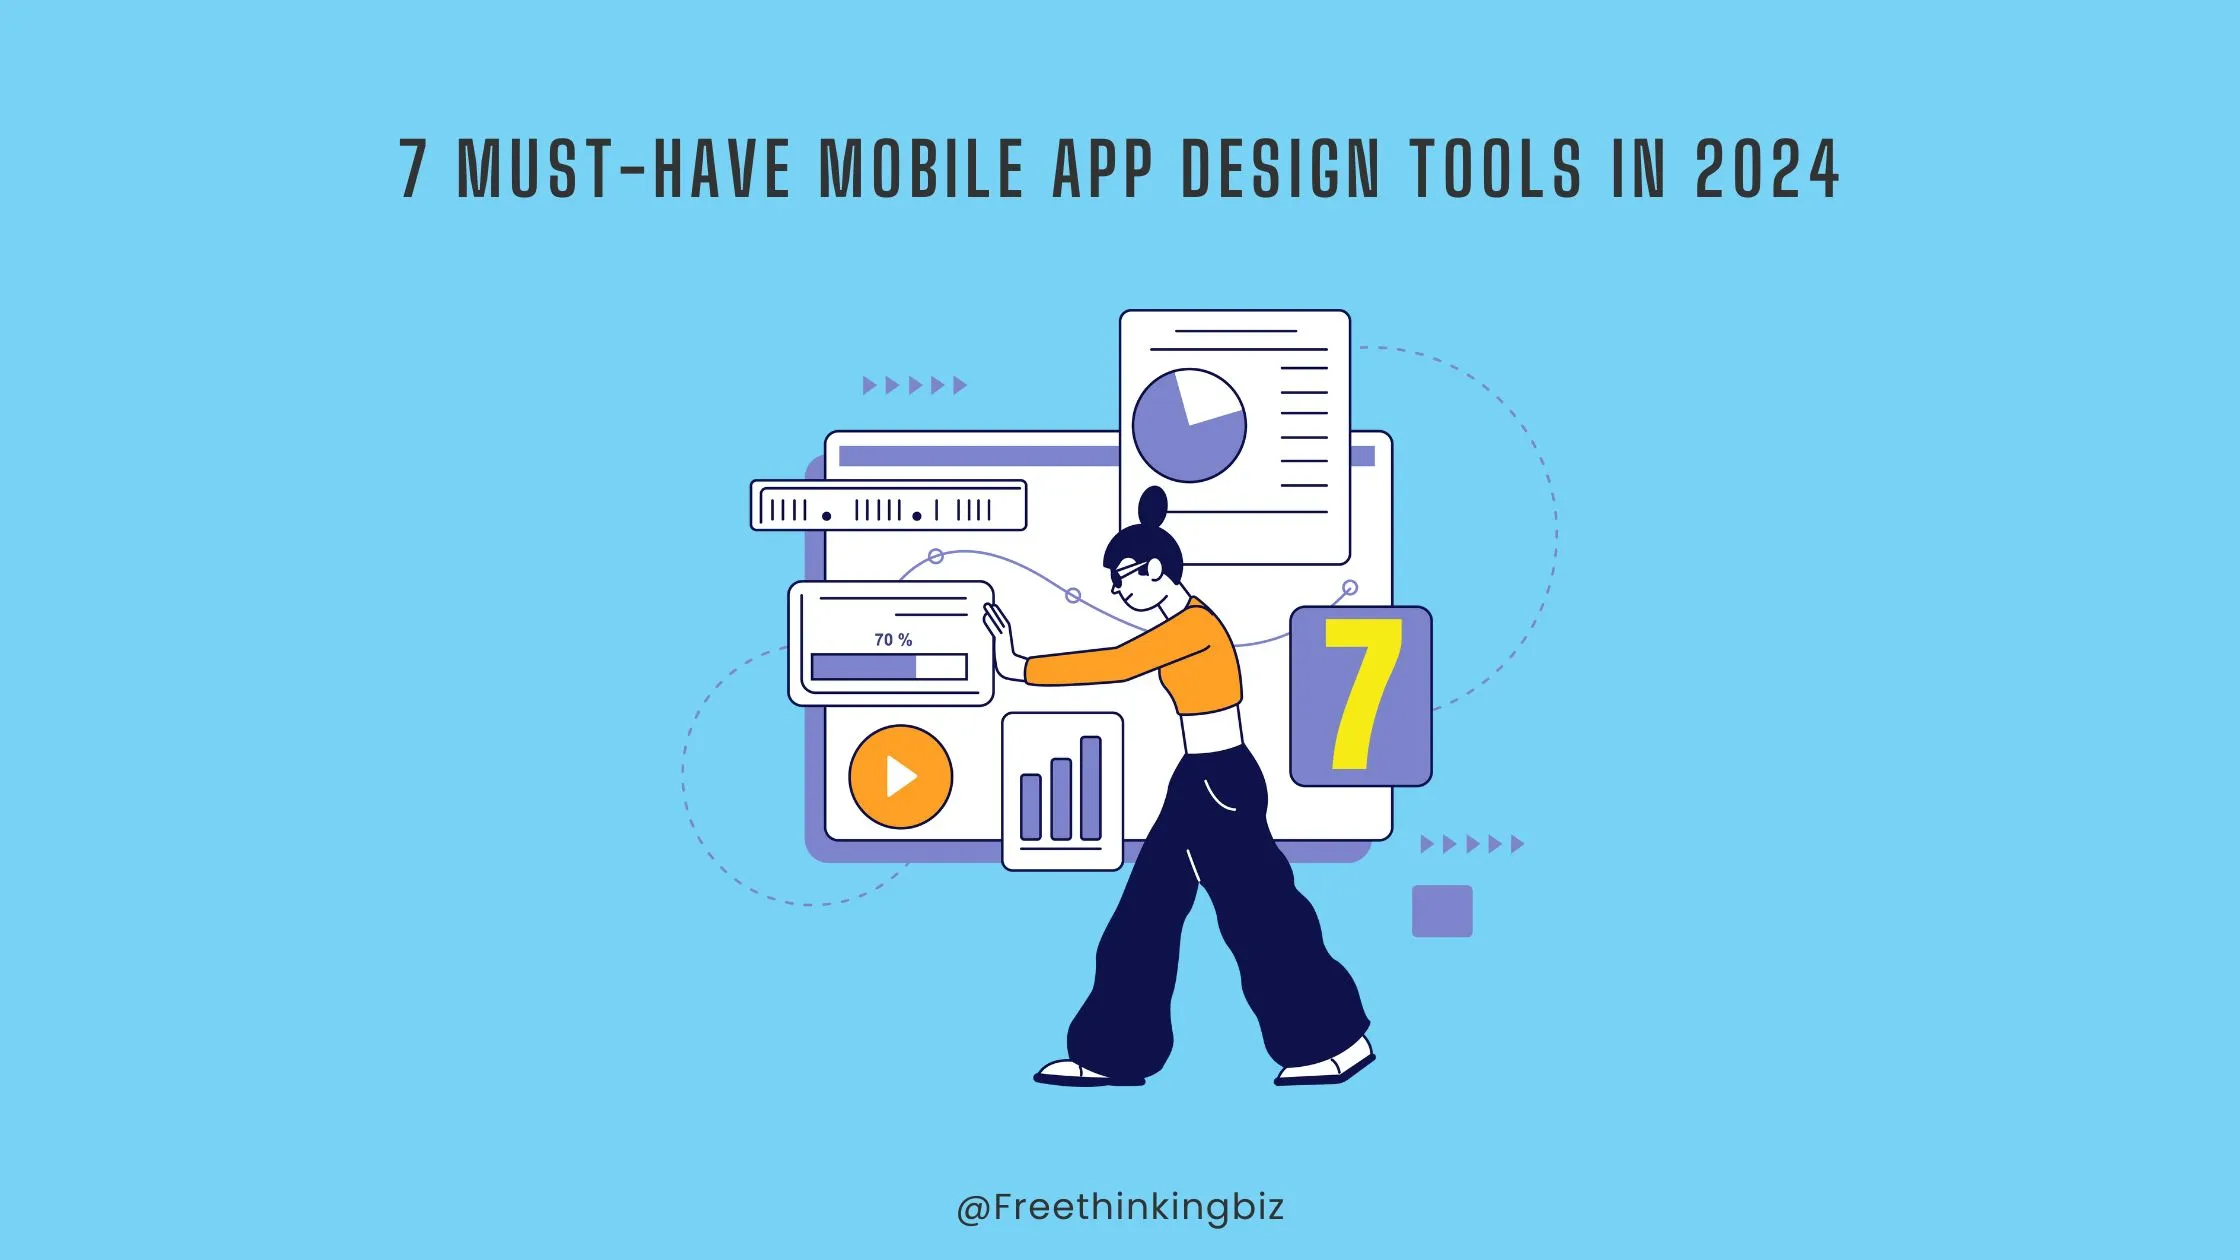 7 must have mobile app design tools for 2024